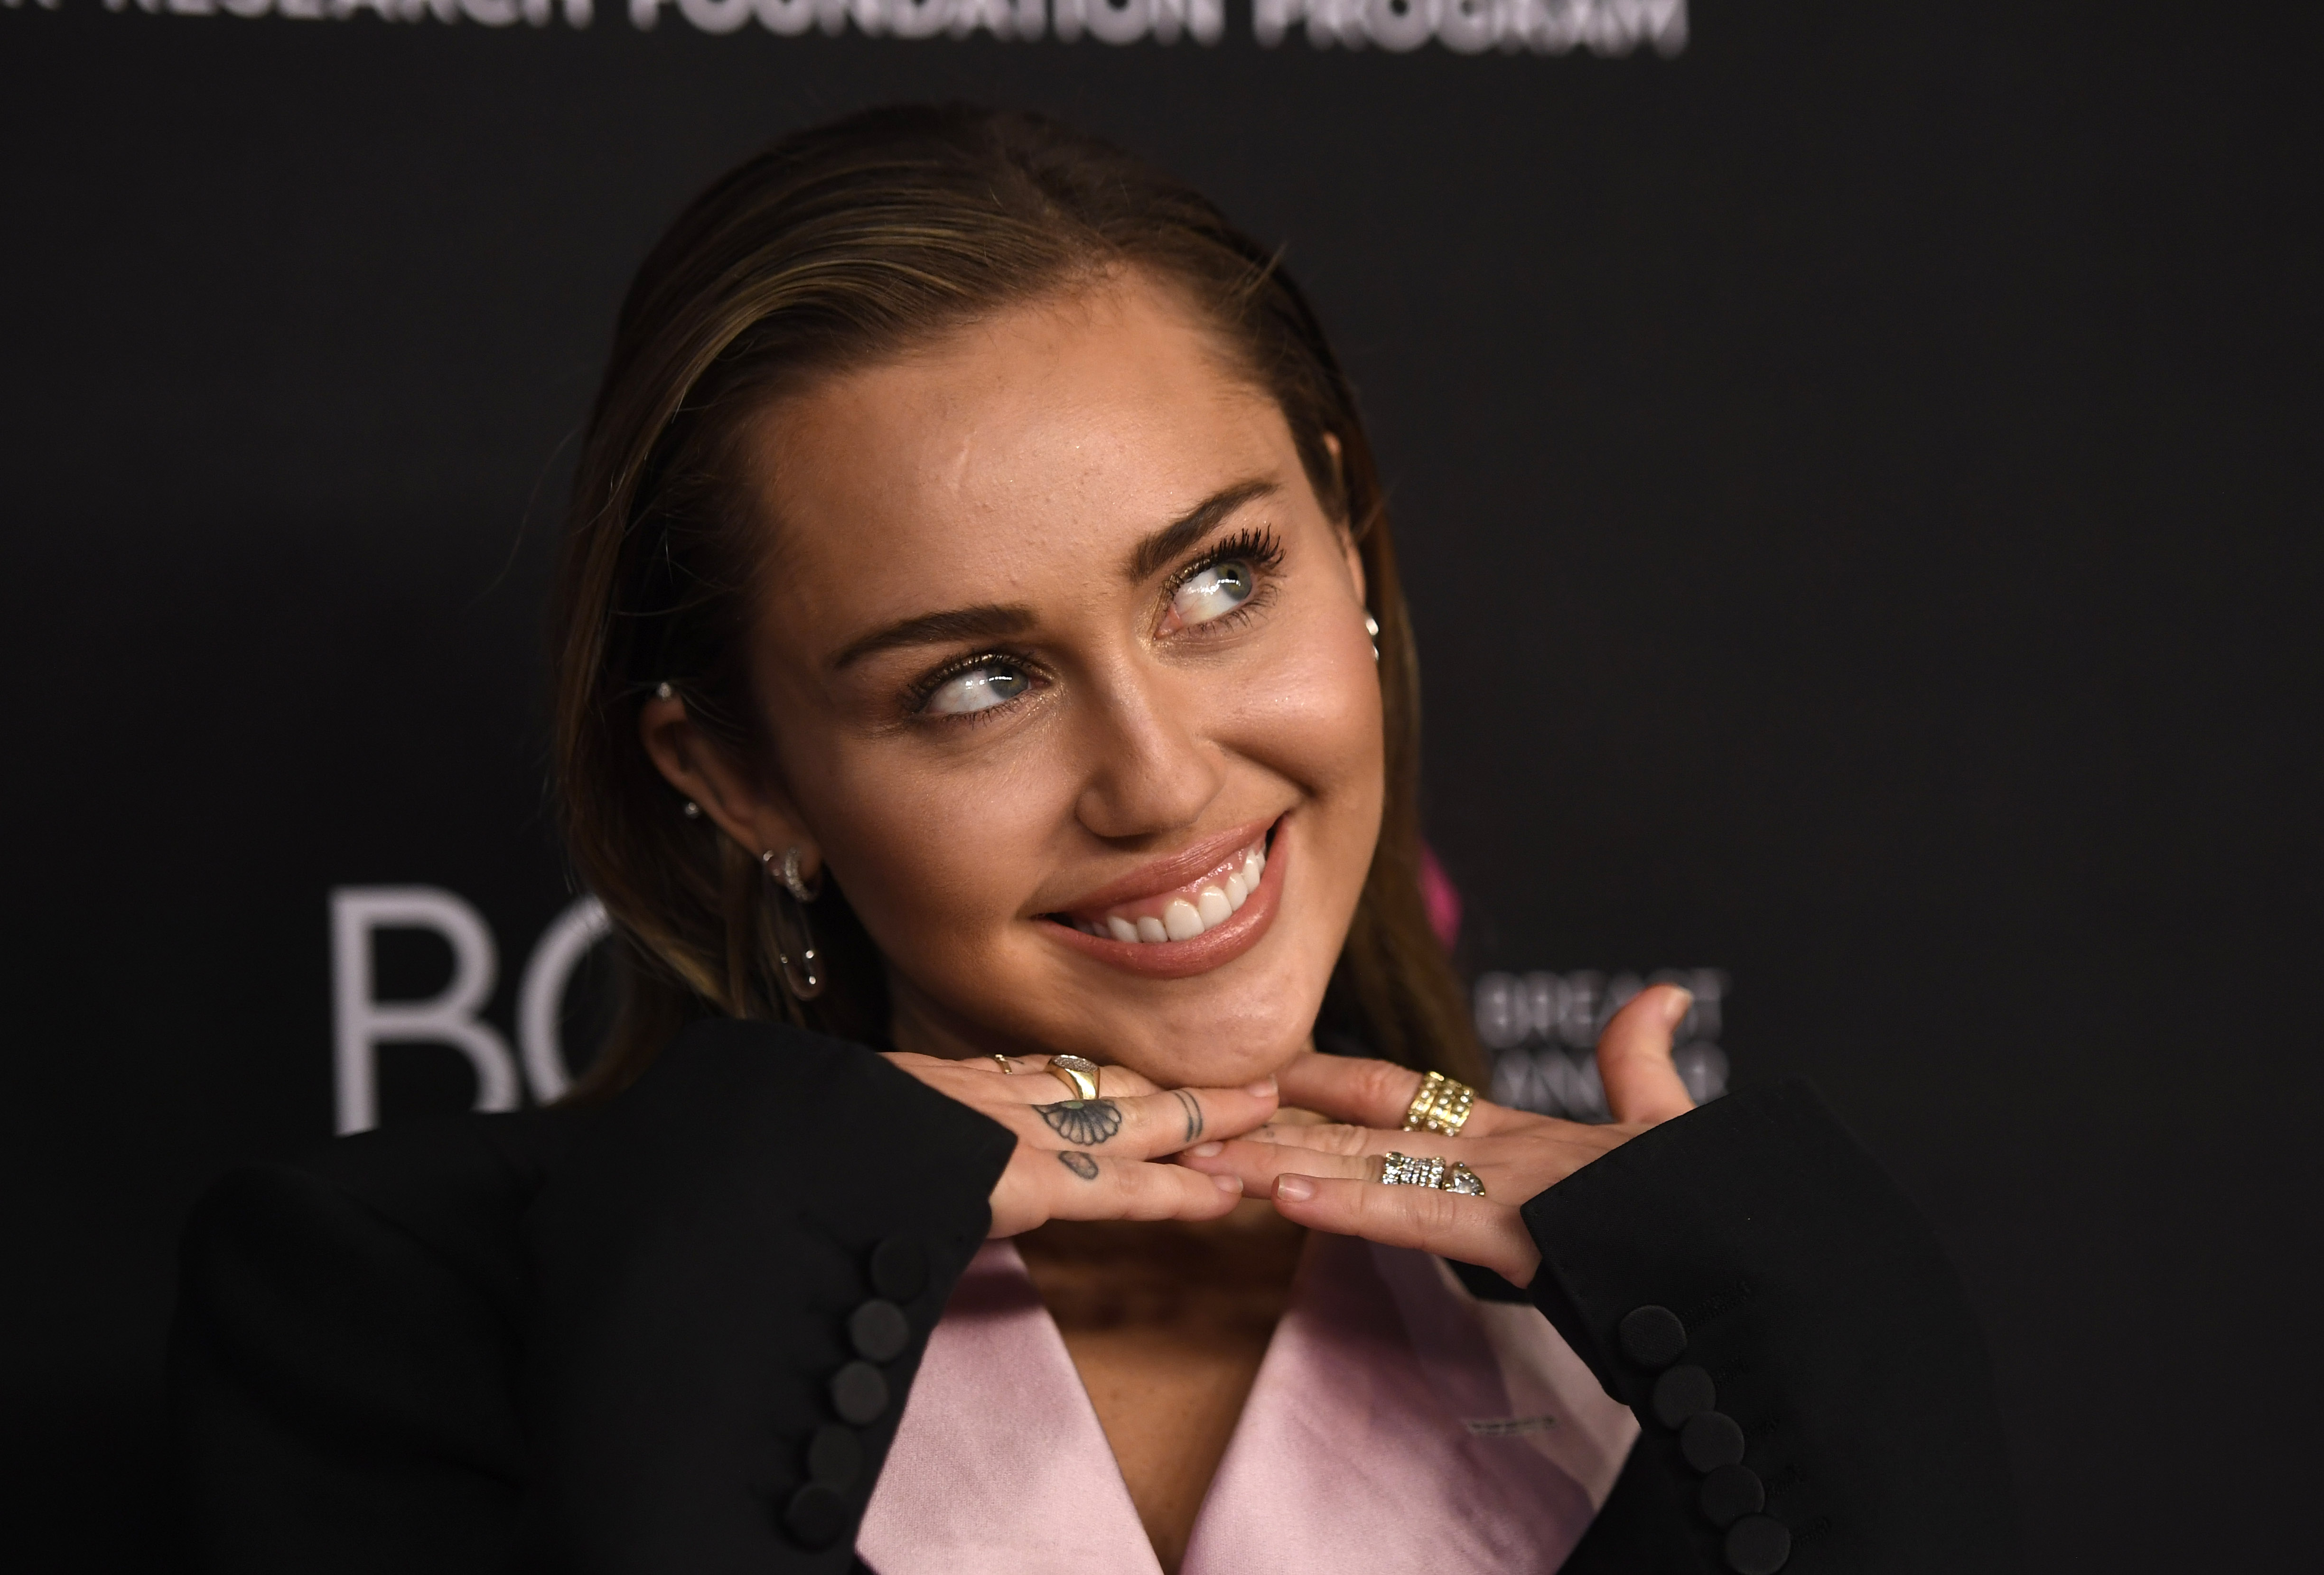 Miley Cyrus attends The Women's Cancer Research Fund's An Unforgettable Evening Benefit Gala at the Beverly Wilshire Four Seasons Hotel on February 28, 2019 in Beverly Hills, California. (Photo by Frazer Harrison/Getty Images)